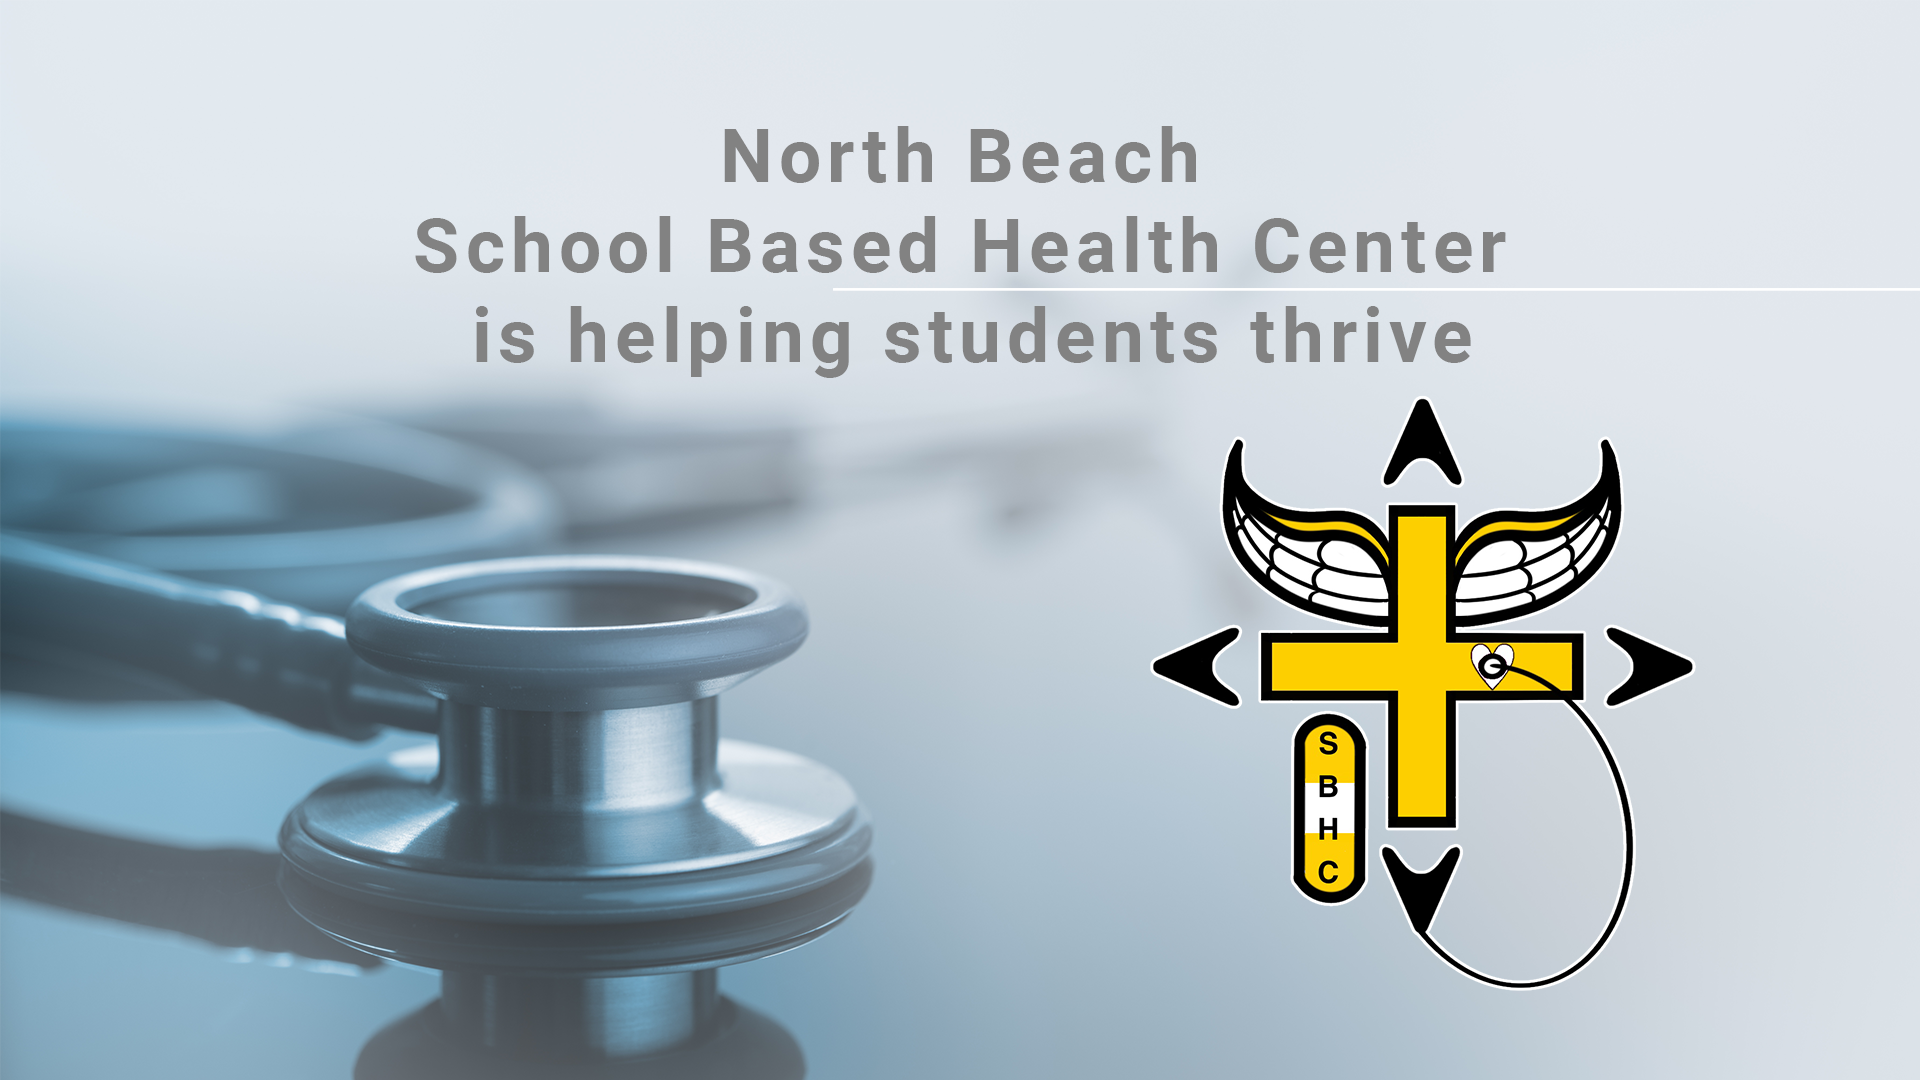 Learn more about the new North Beach School Based Health Center